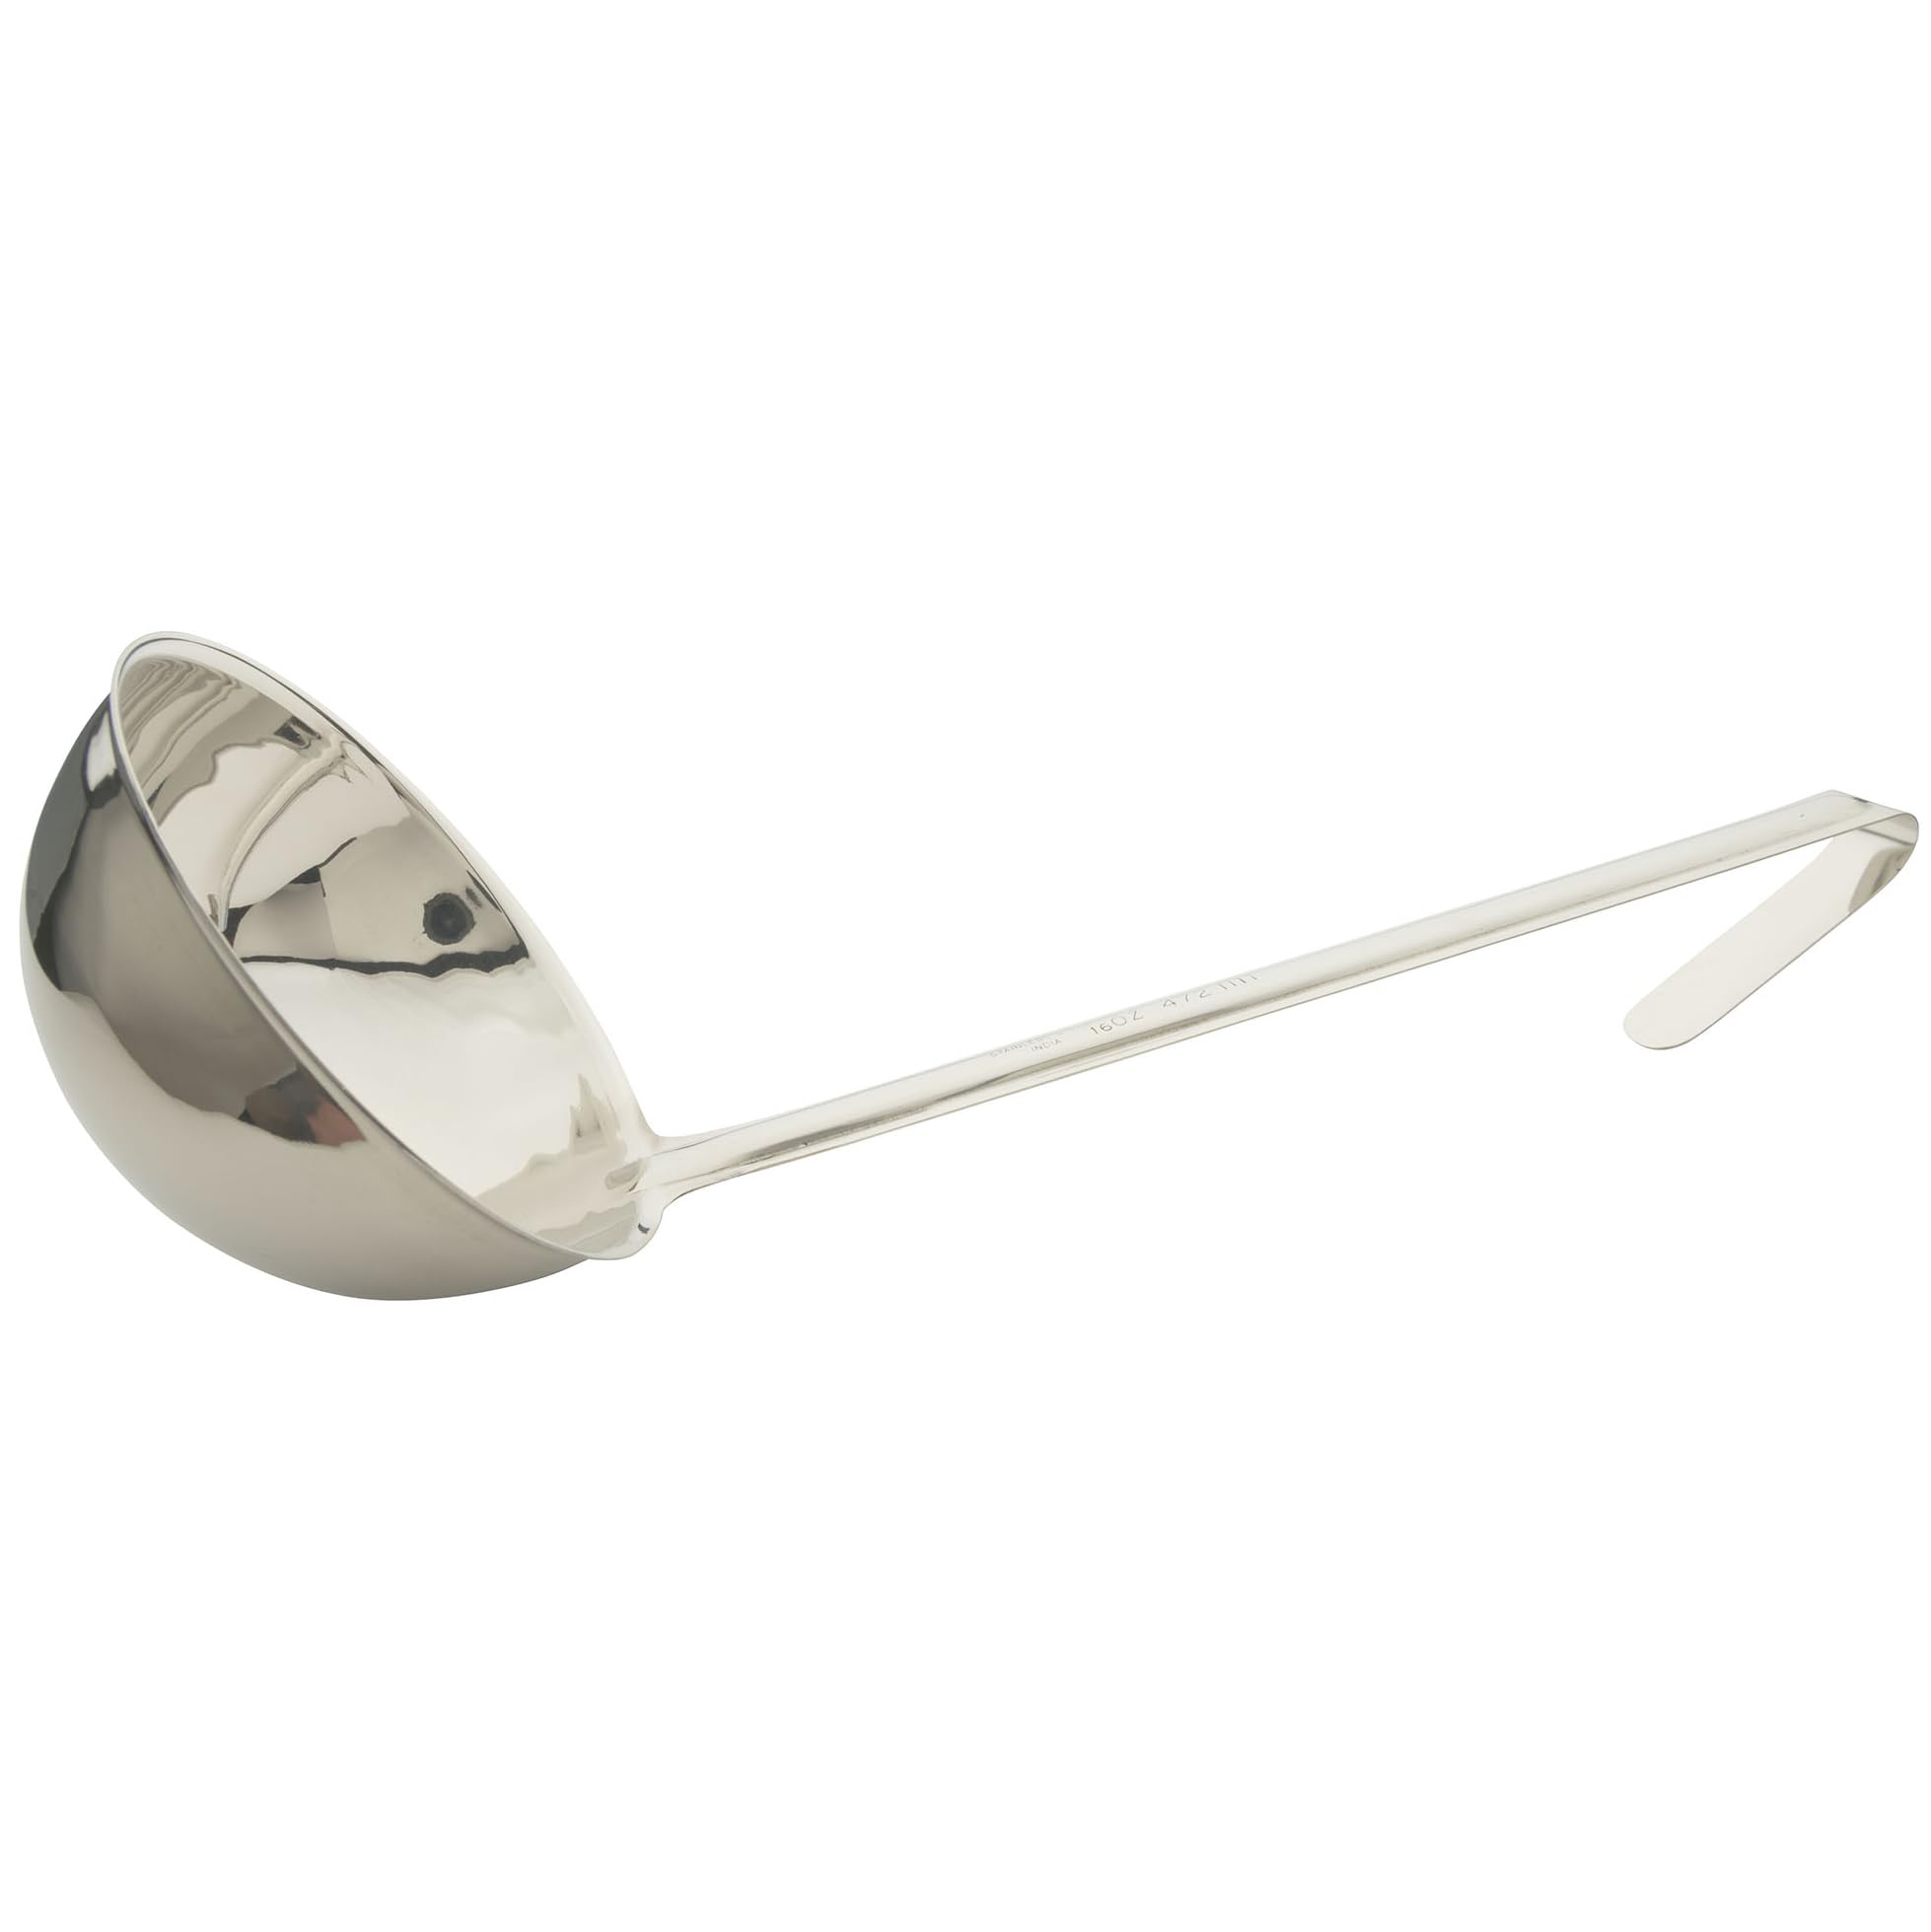 Winco Ladle 16 oz. one piece LDI-16 NEW, Stainless